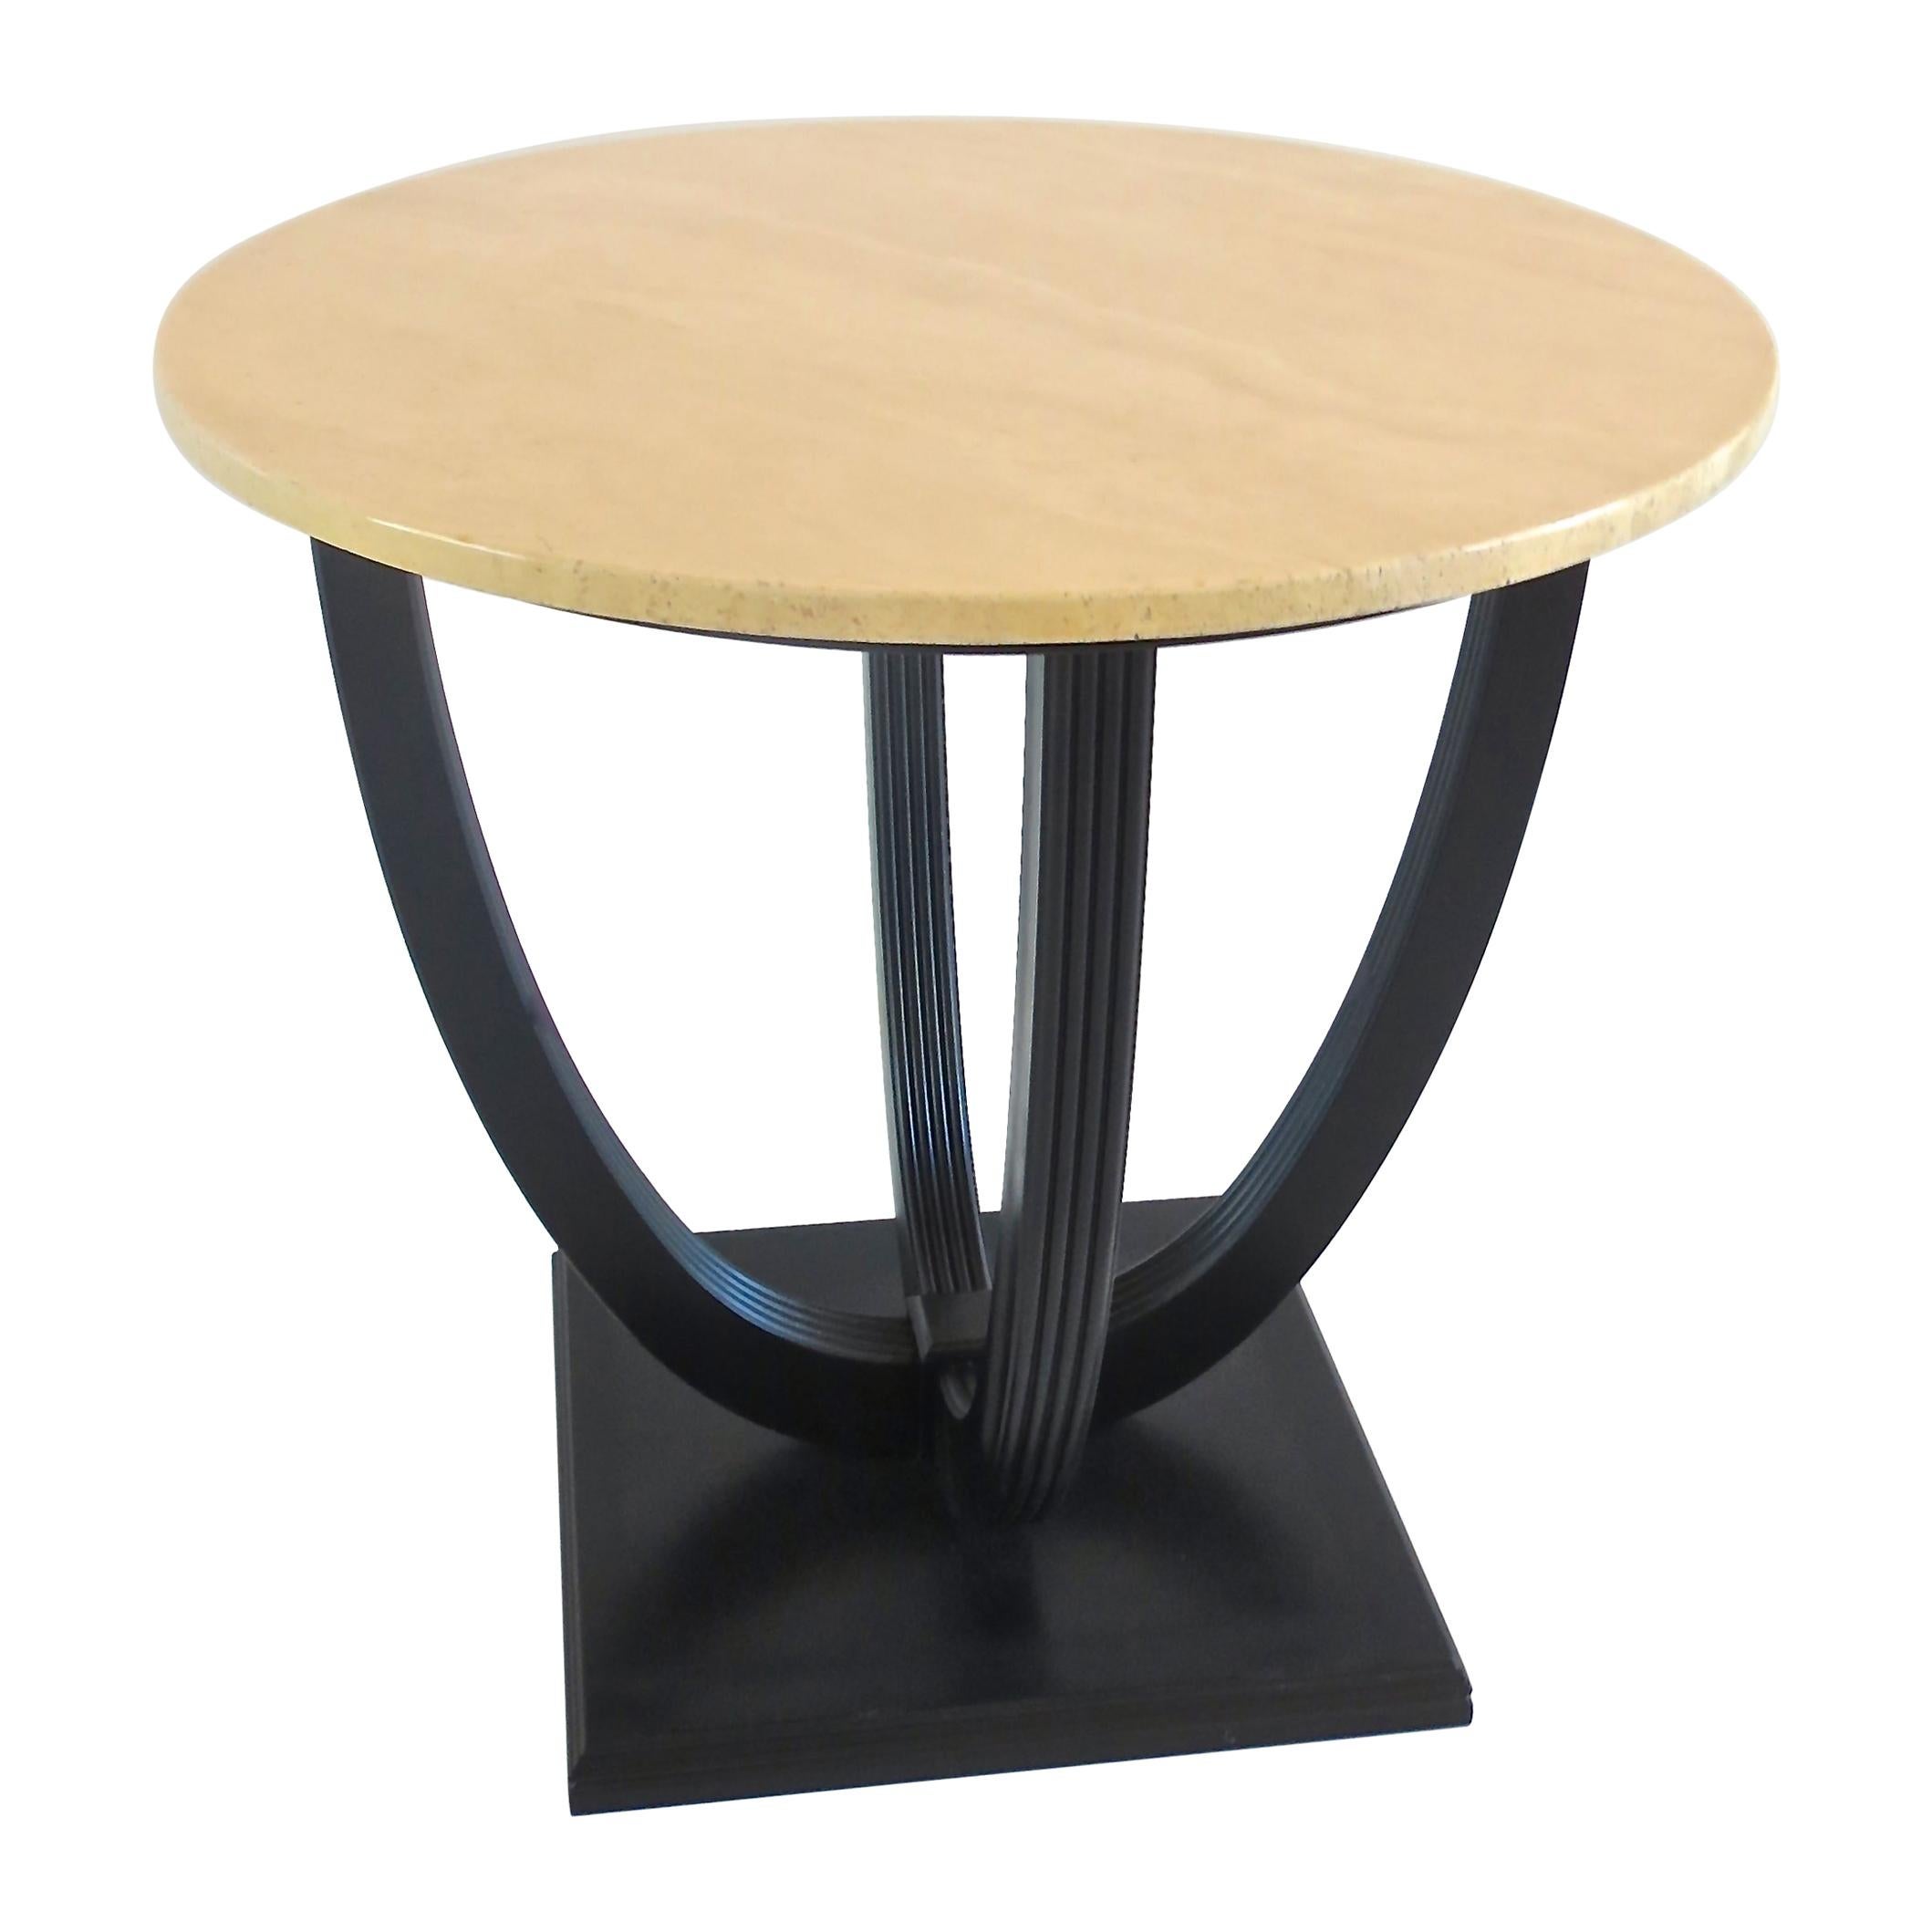 Round Deco Coffee Table Black Laquered from Excelsior Hotel Gallia, 1932